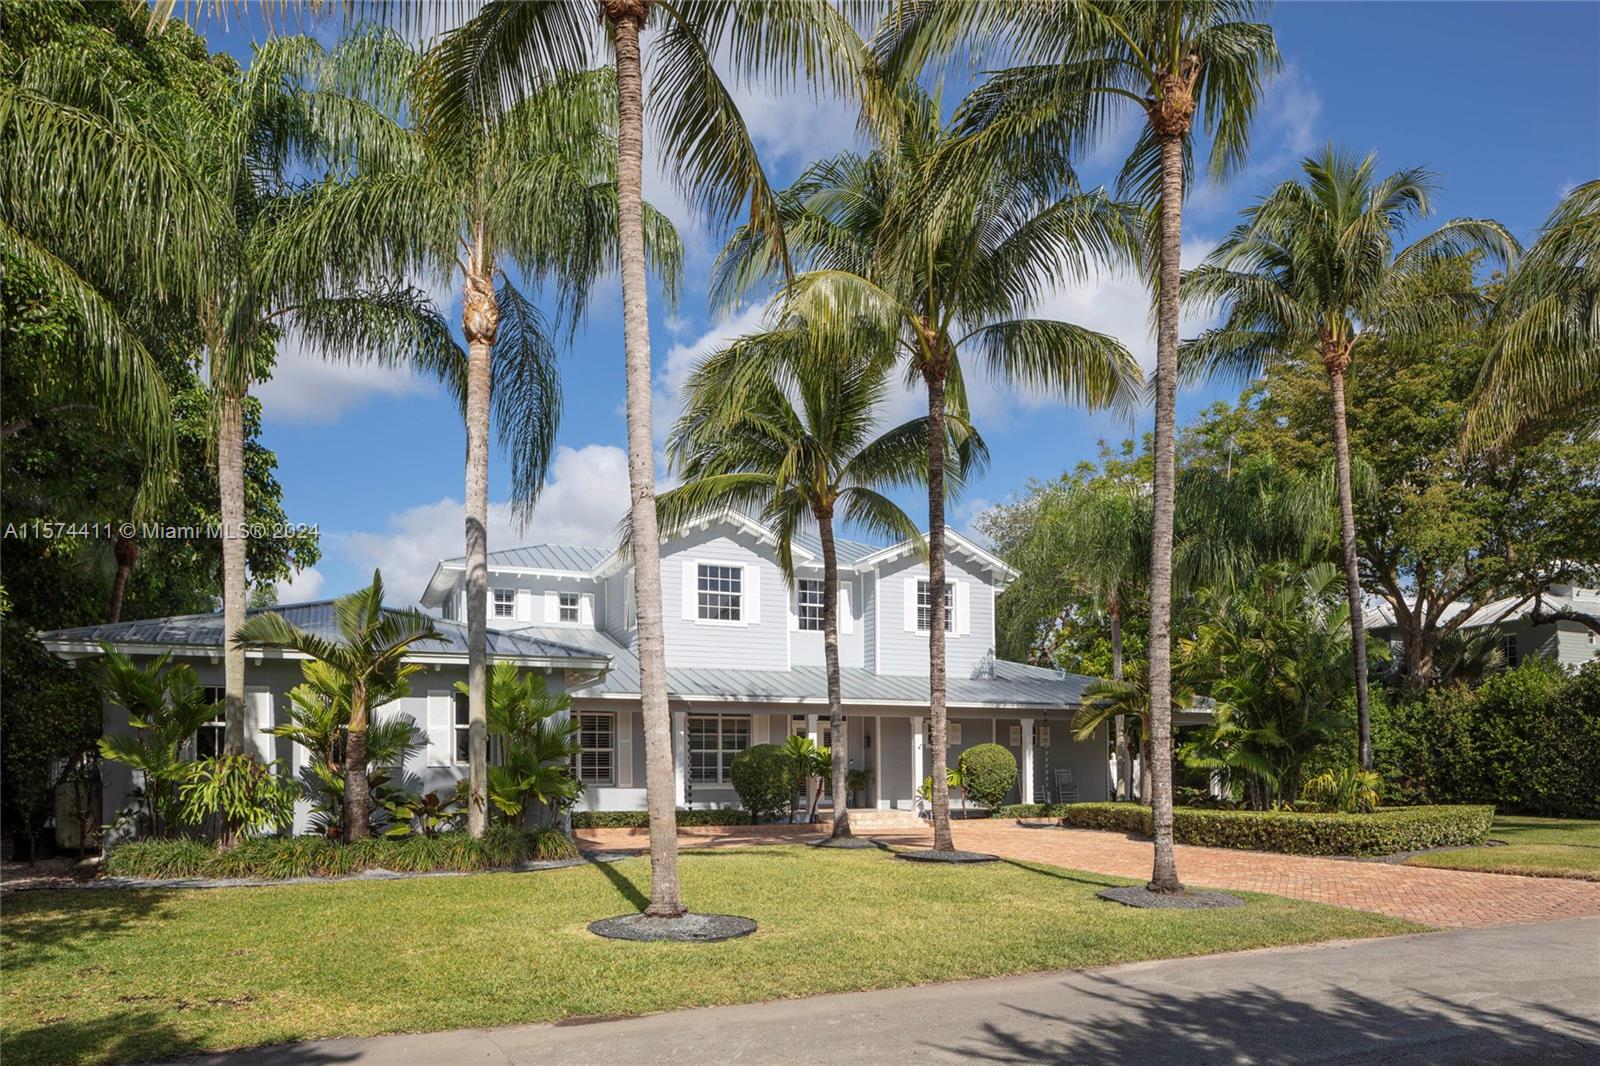 A special Key West estate on a beautiful canal-front block in the heart of Pinecrest. This home exudes both luxury and warmth with a thoughtful floor plan, soaring ceilings, abundant natural light, and tasteful finishes indoors and out. The heart of the home is the recently renovated kitchen with gas range, wine fridge, breakfast area, and picture window out to your backyard oasis. Enjoy the breeze on your wraparound front and back verandas, grill at the new summer kitchen, or splash in the sparkling pool. Oversized primary suite offers two walk-in closets, double vanities, and standalone tub. Stone and hardwood floors throughout, plantation shutters, Chicago brick driveway, and two-car garage. Perfectly located near top private and public schools. A home like this rarely comes along!